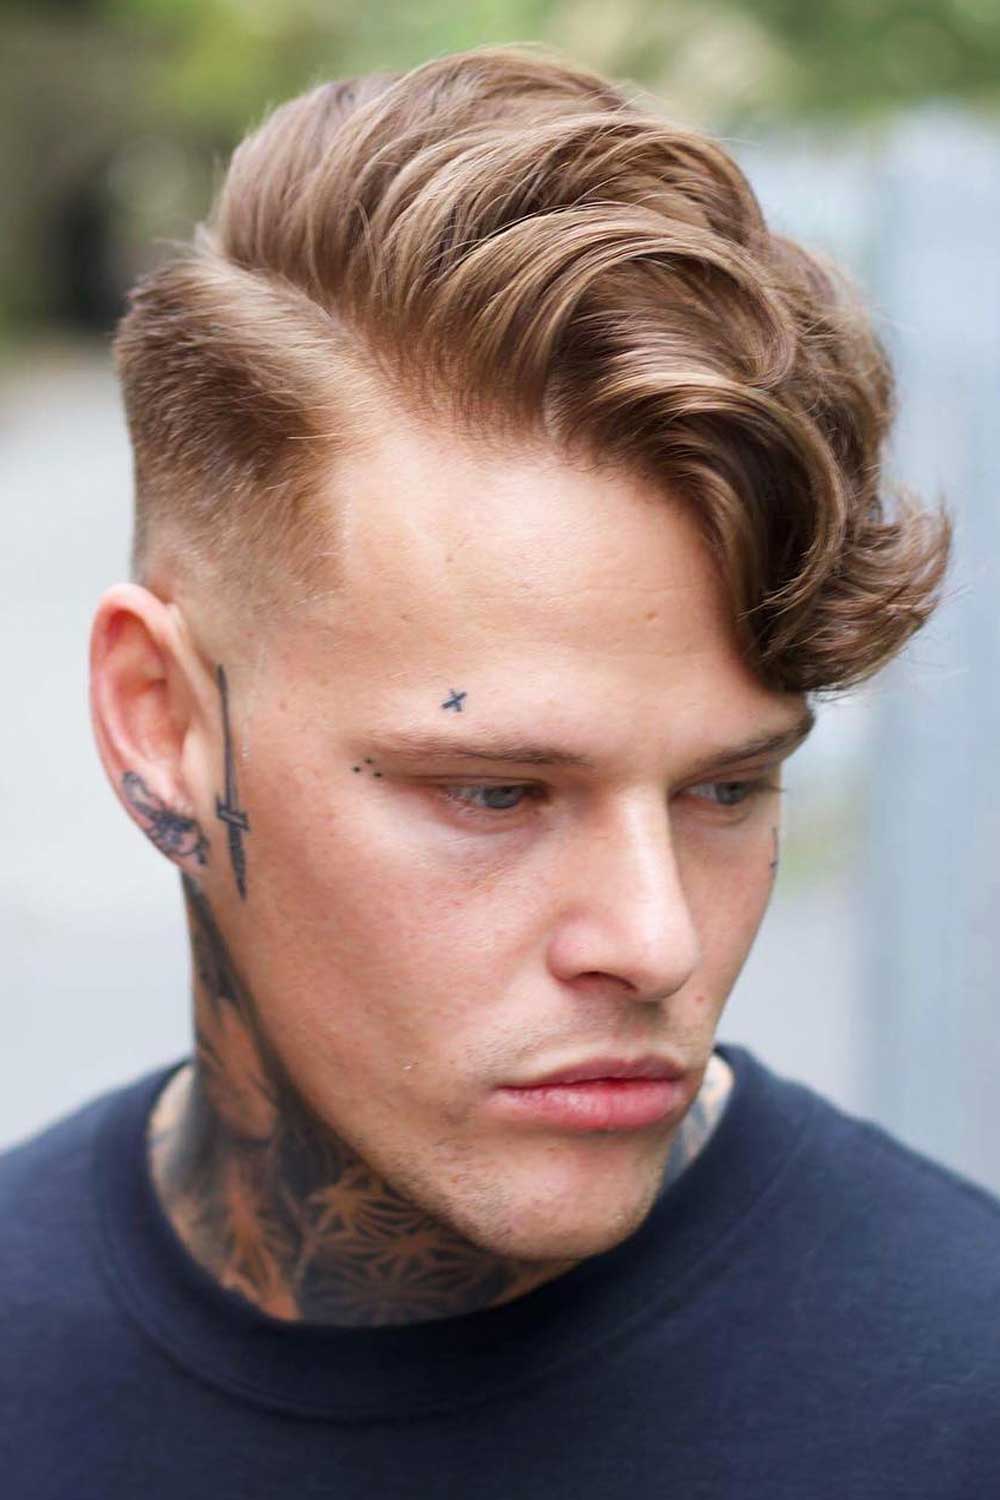 Long Hair With Undercut Hairstyle #comboverfade #combover #fade